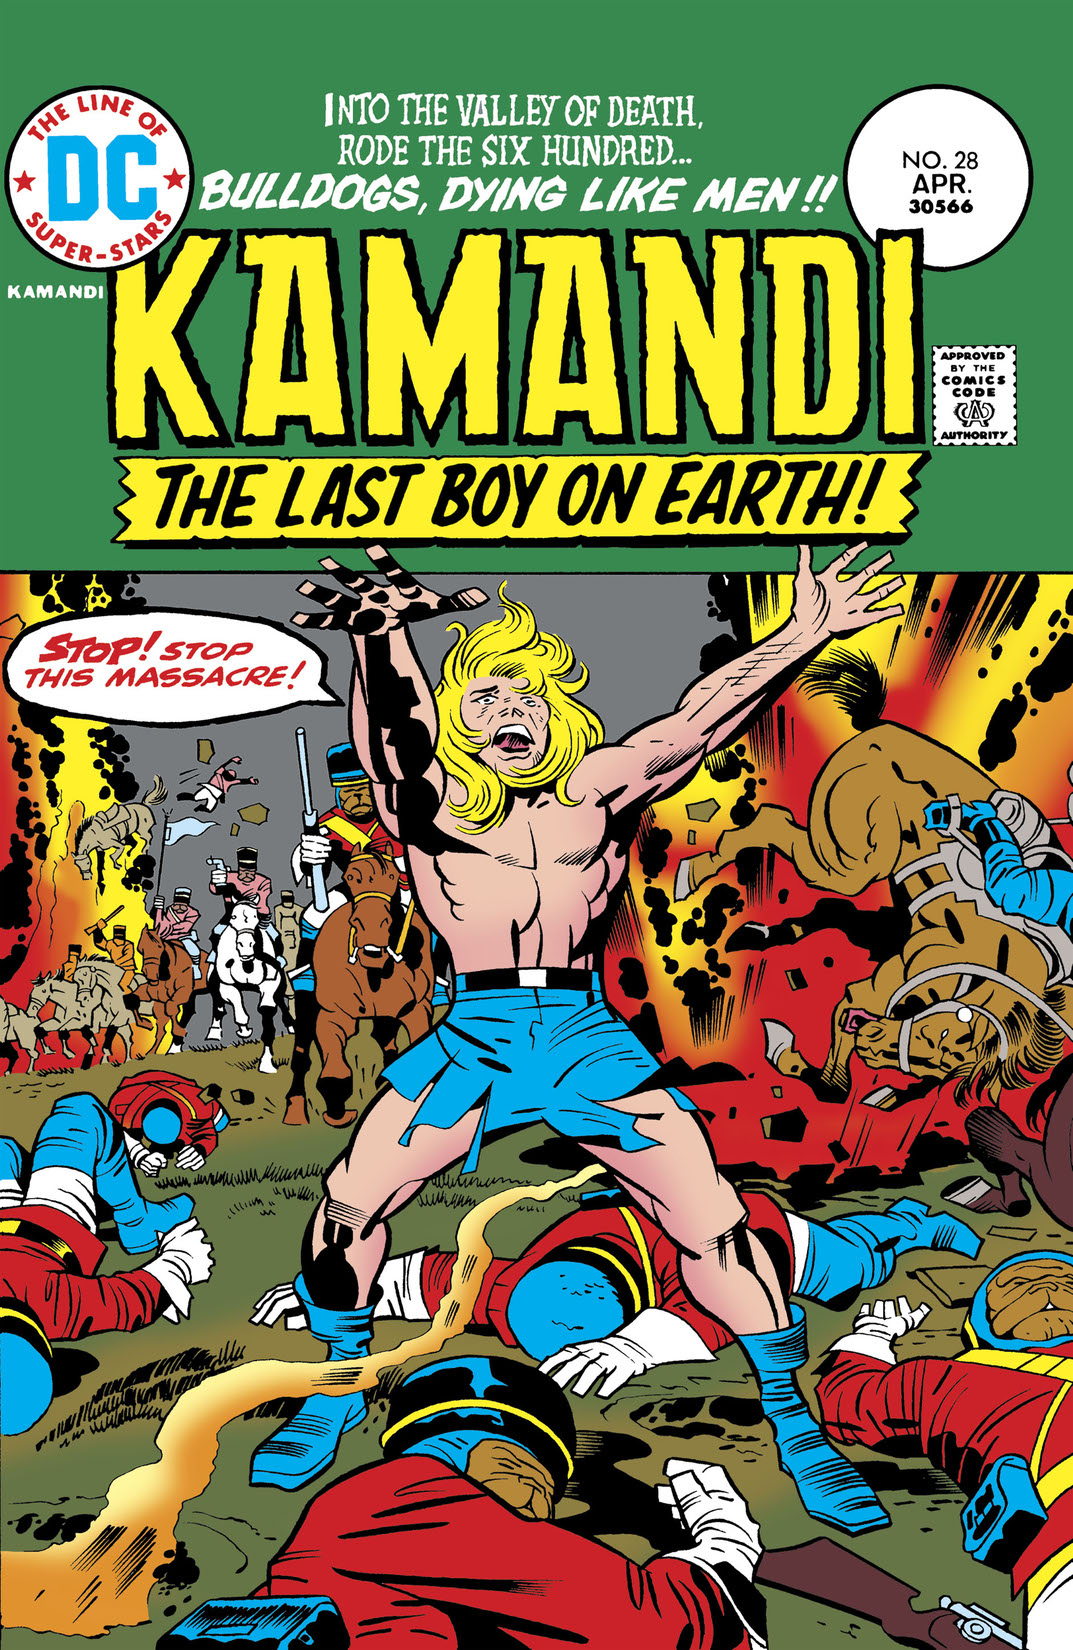 Kamandi: The Last Boy on Earth #28 preview images